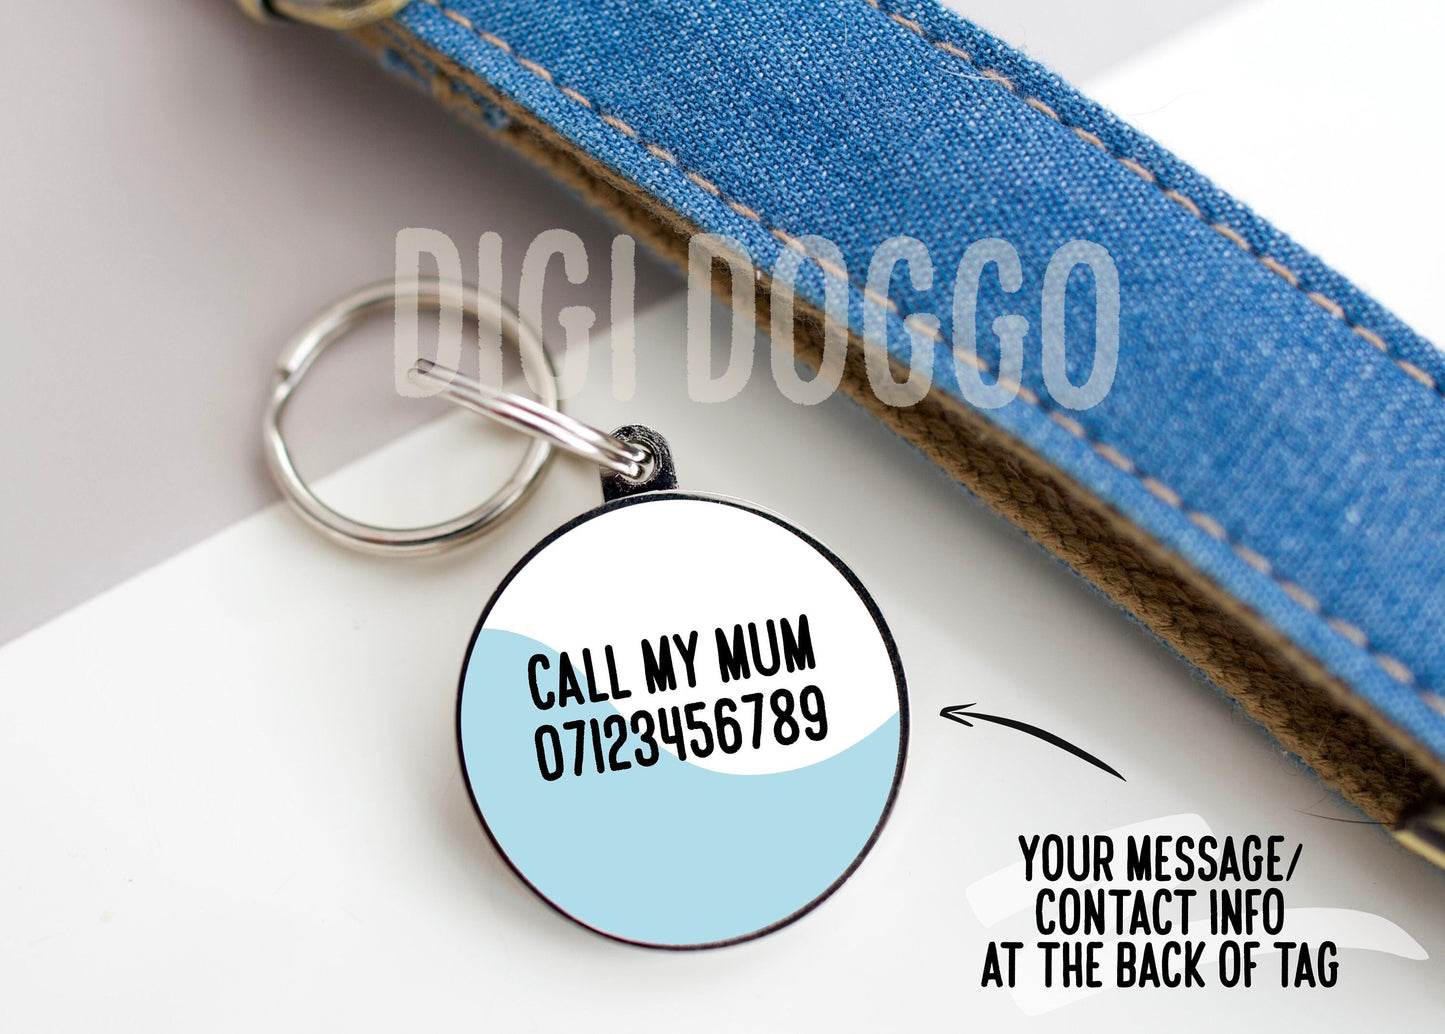 Dogue de Bordeaux Outline ID Tag/ Personalised Dog Breed Face Circle Tag/ Customised Dogue de Bordeaux Portrait Tag/ Stylish Dog Lovers Gift